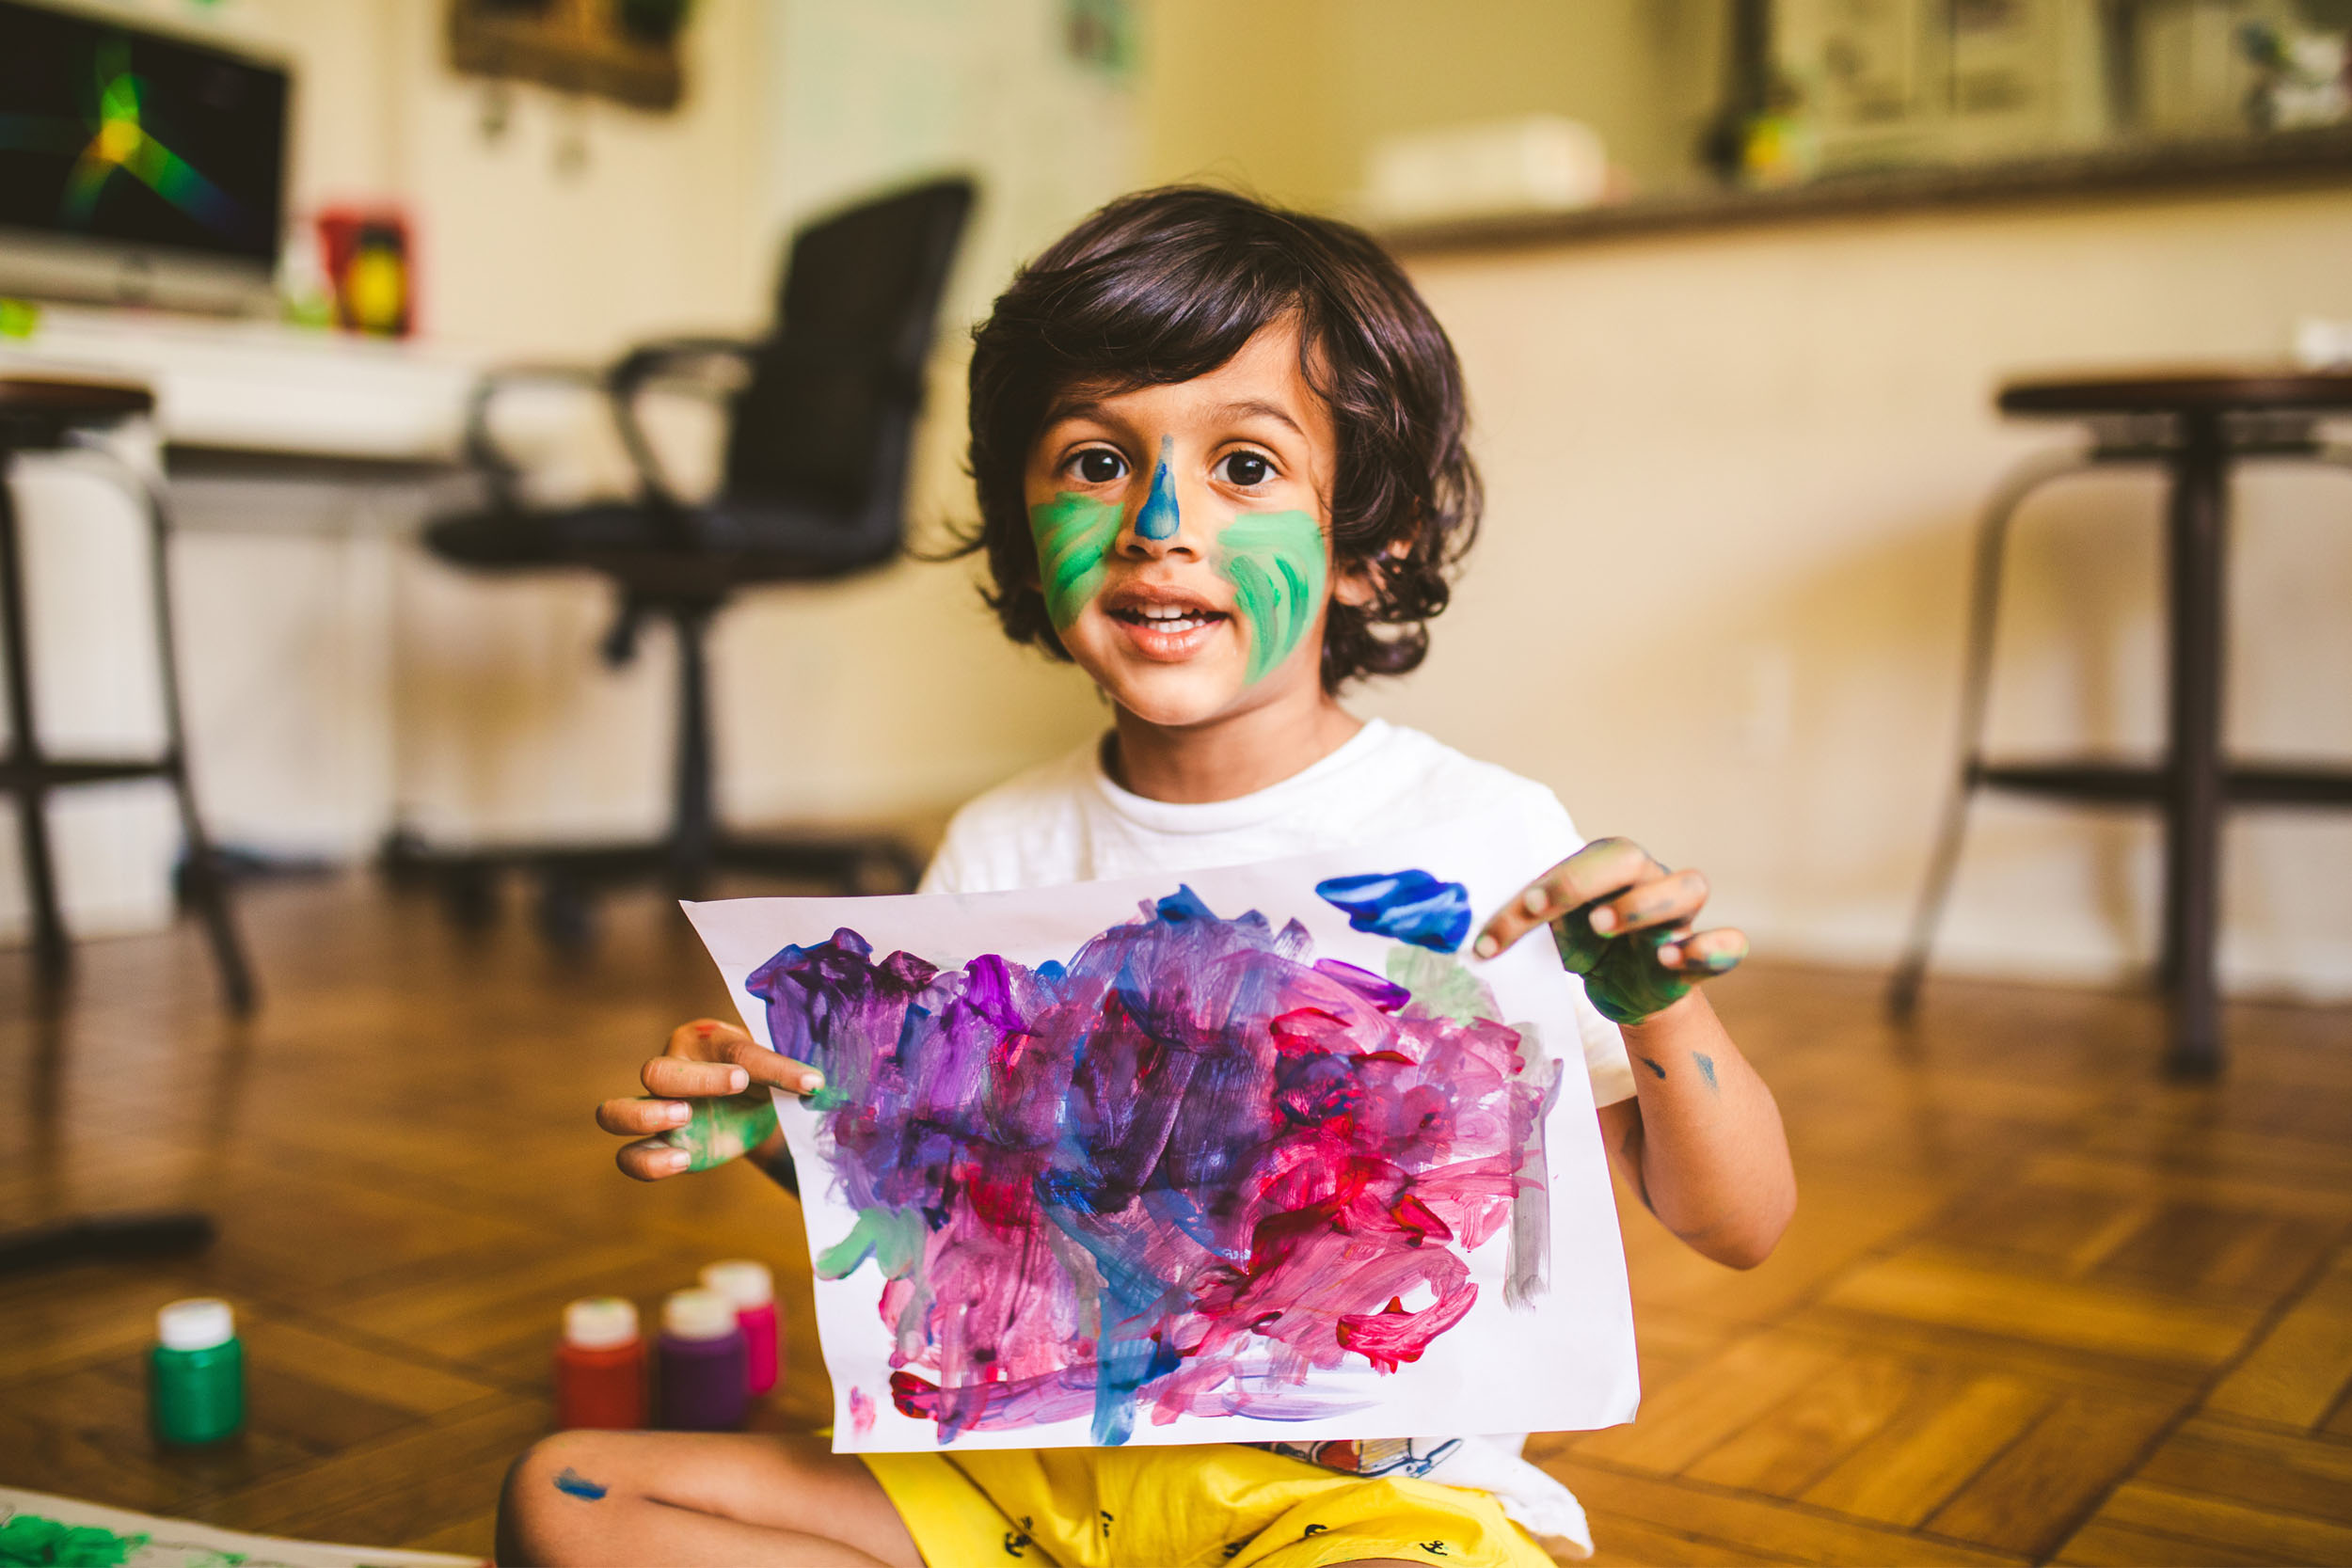 How to Comment on Children’s Artwork: 8 Motivating Ways